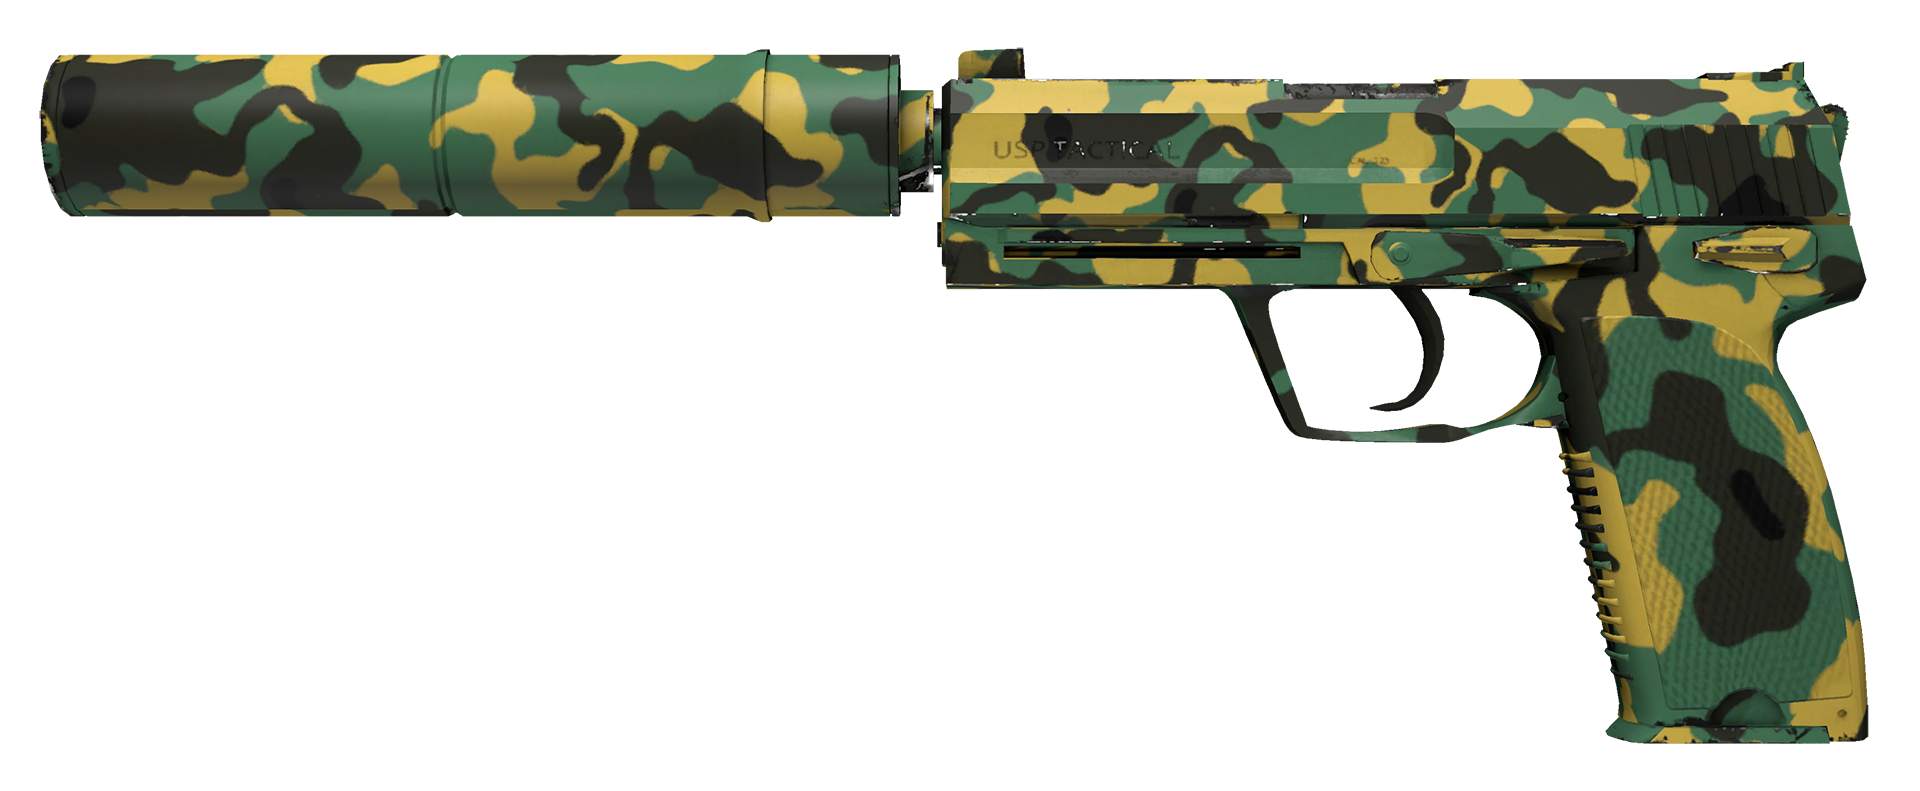 USP-S Overgrowth Large Rendering